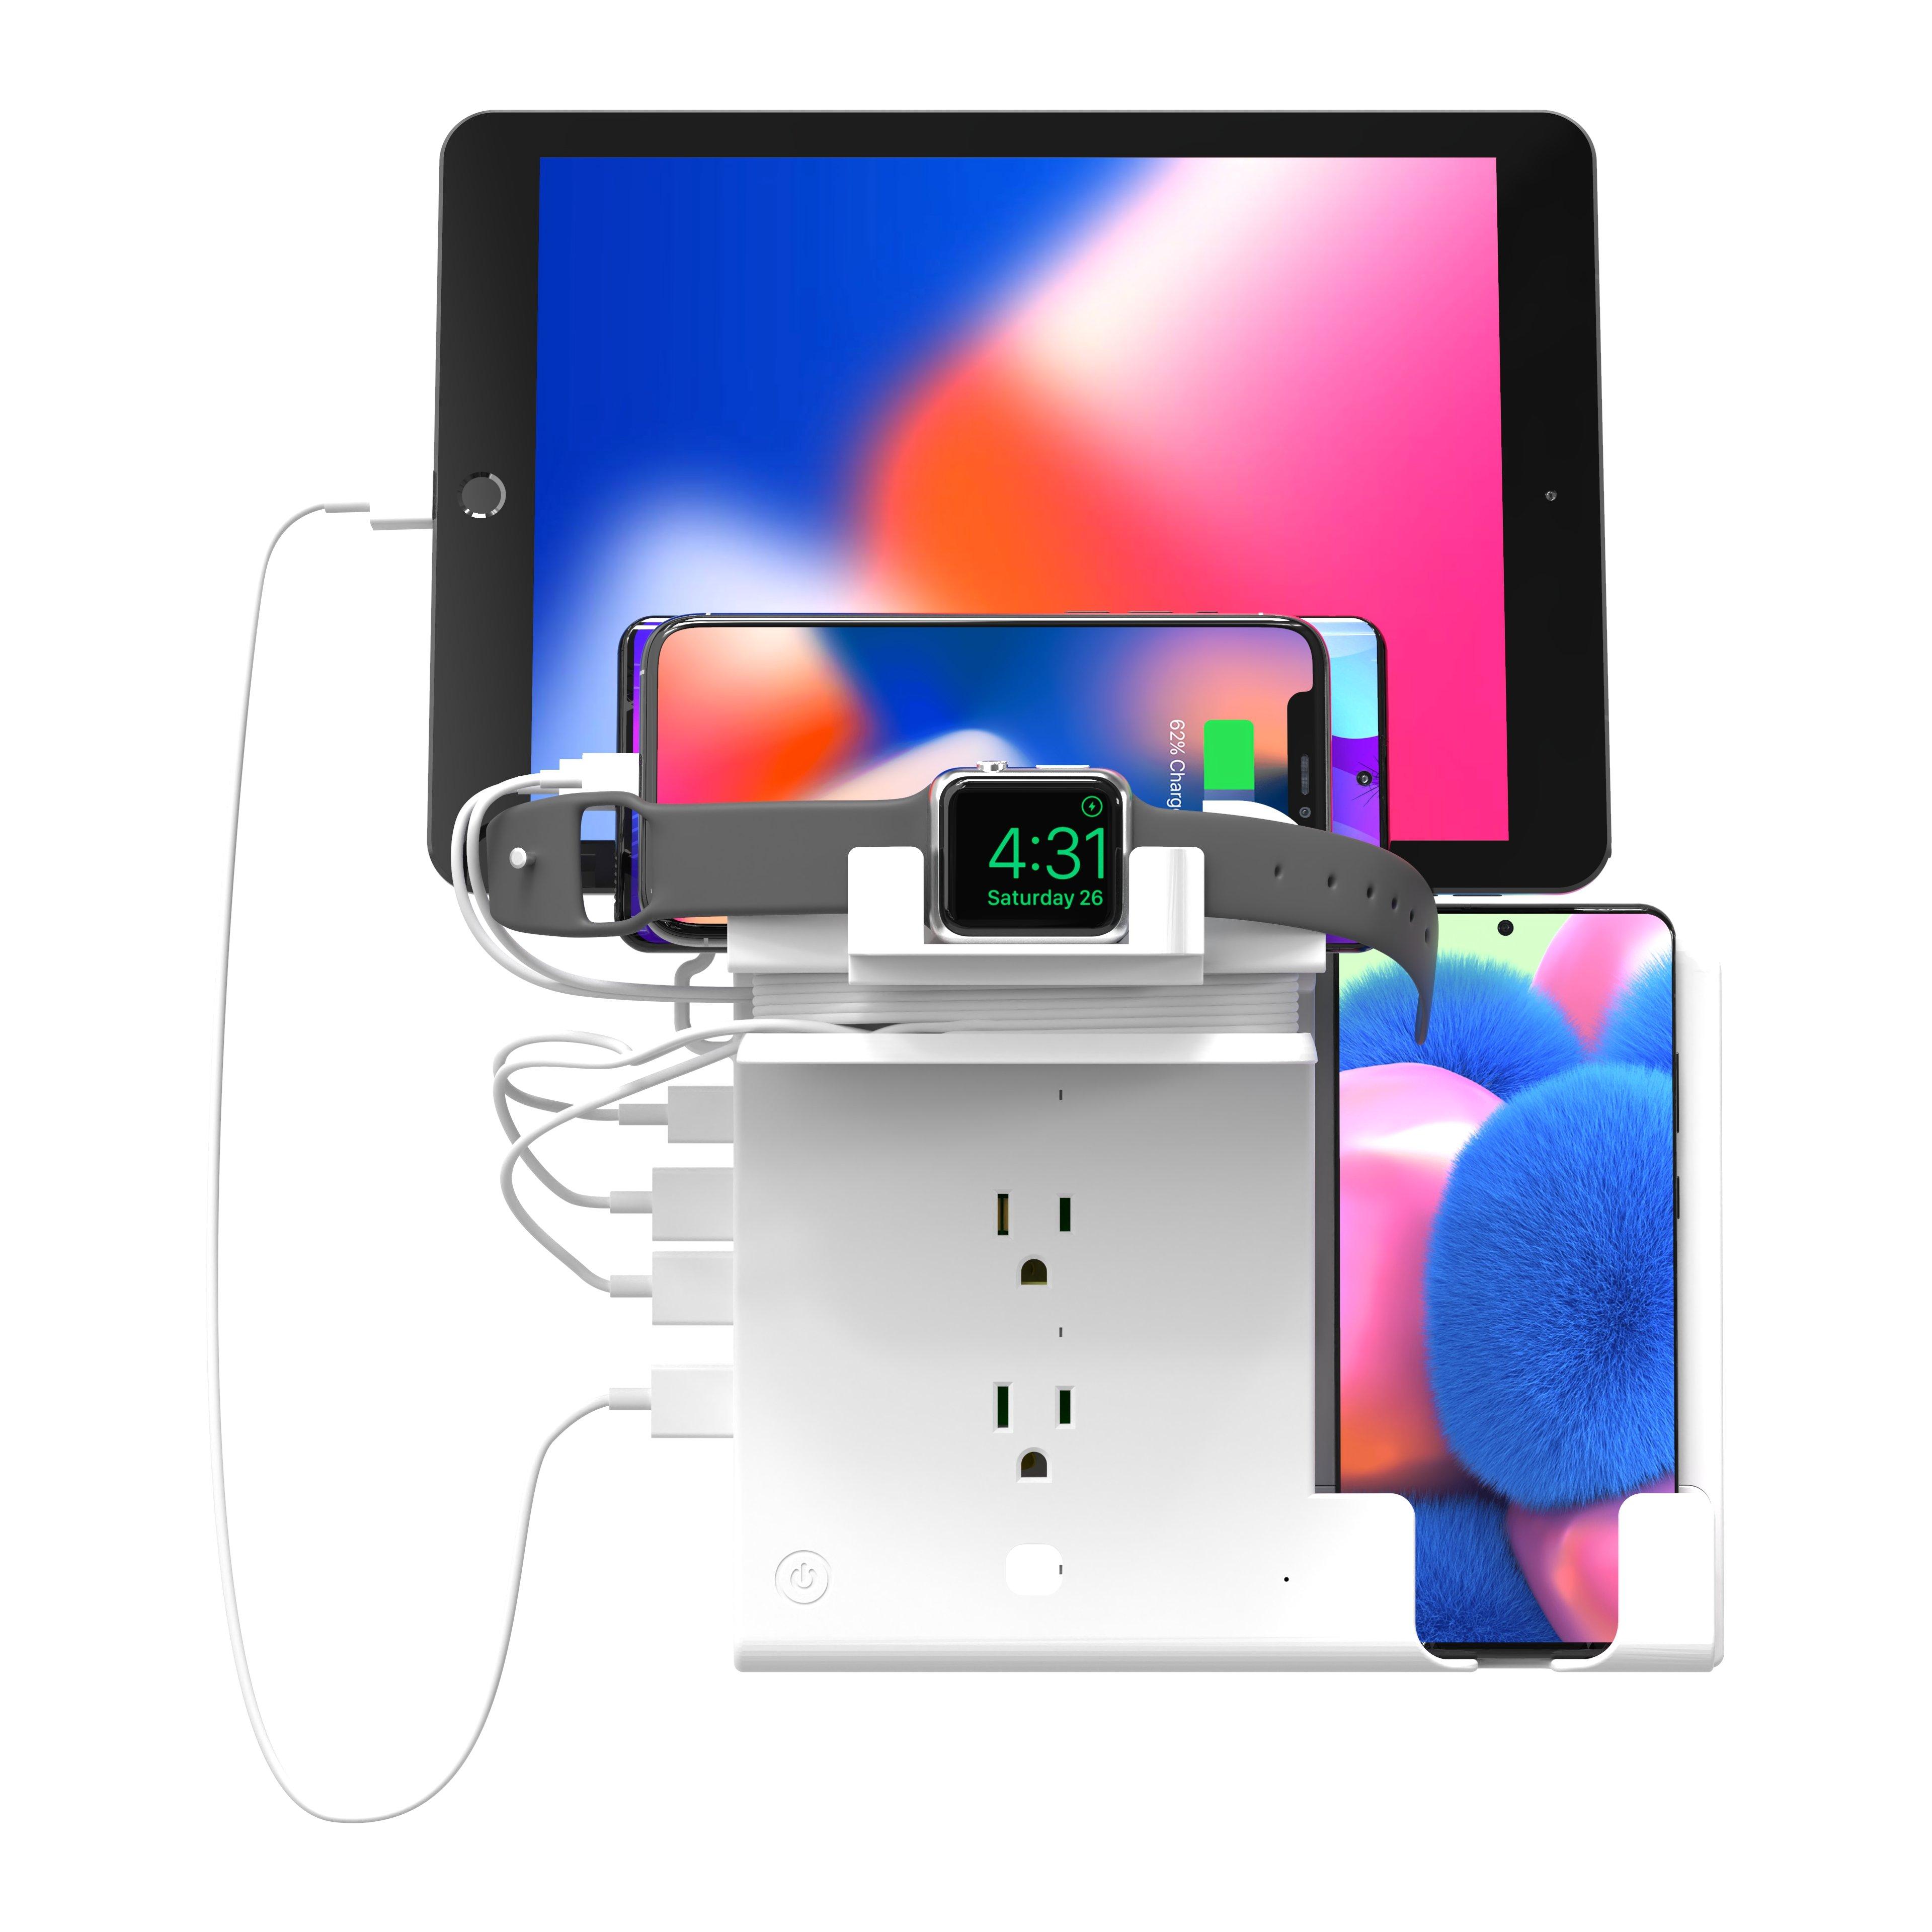 RapidX MyCharging Station All-in-One Multi-Device Charging Station